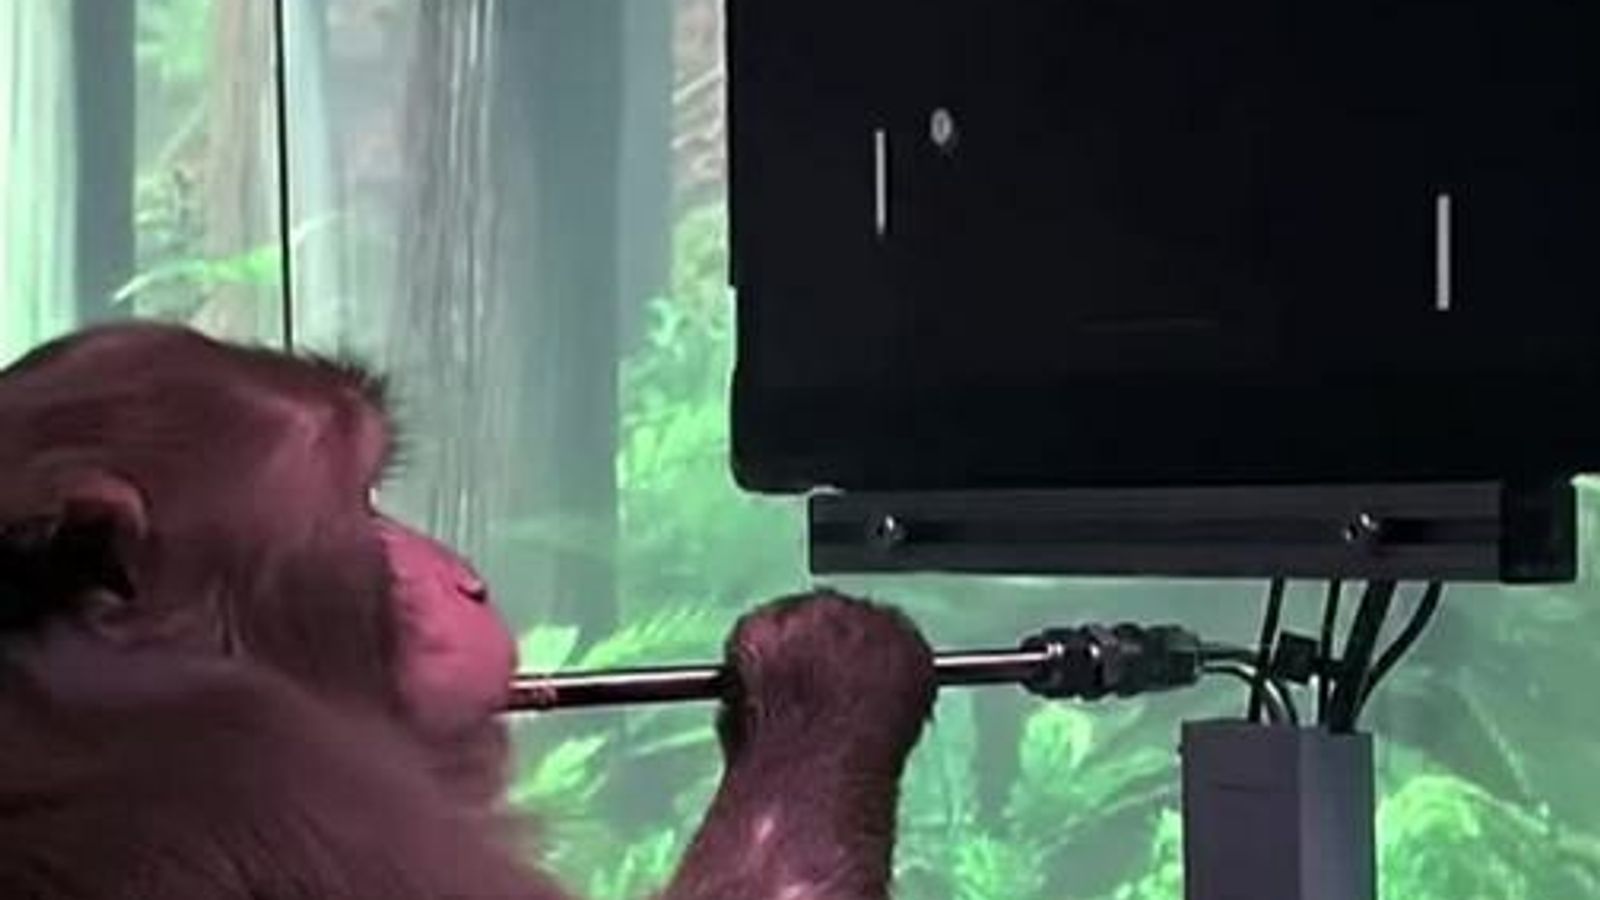 Monkey taught to play Pong with its mind by Neuralink | Offbeat News